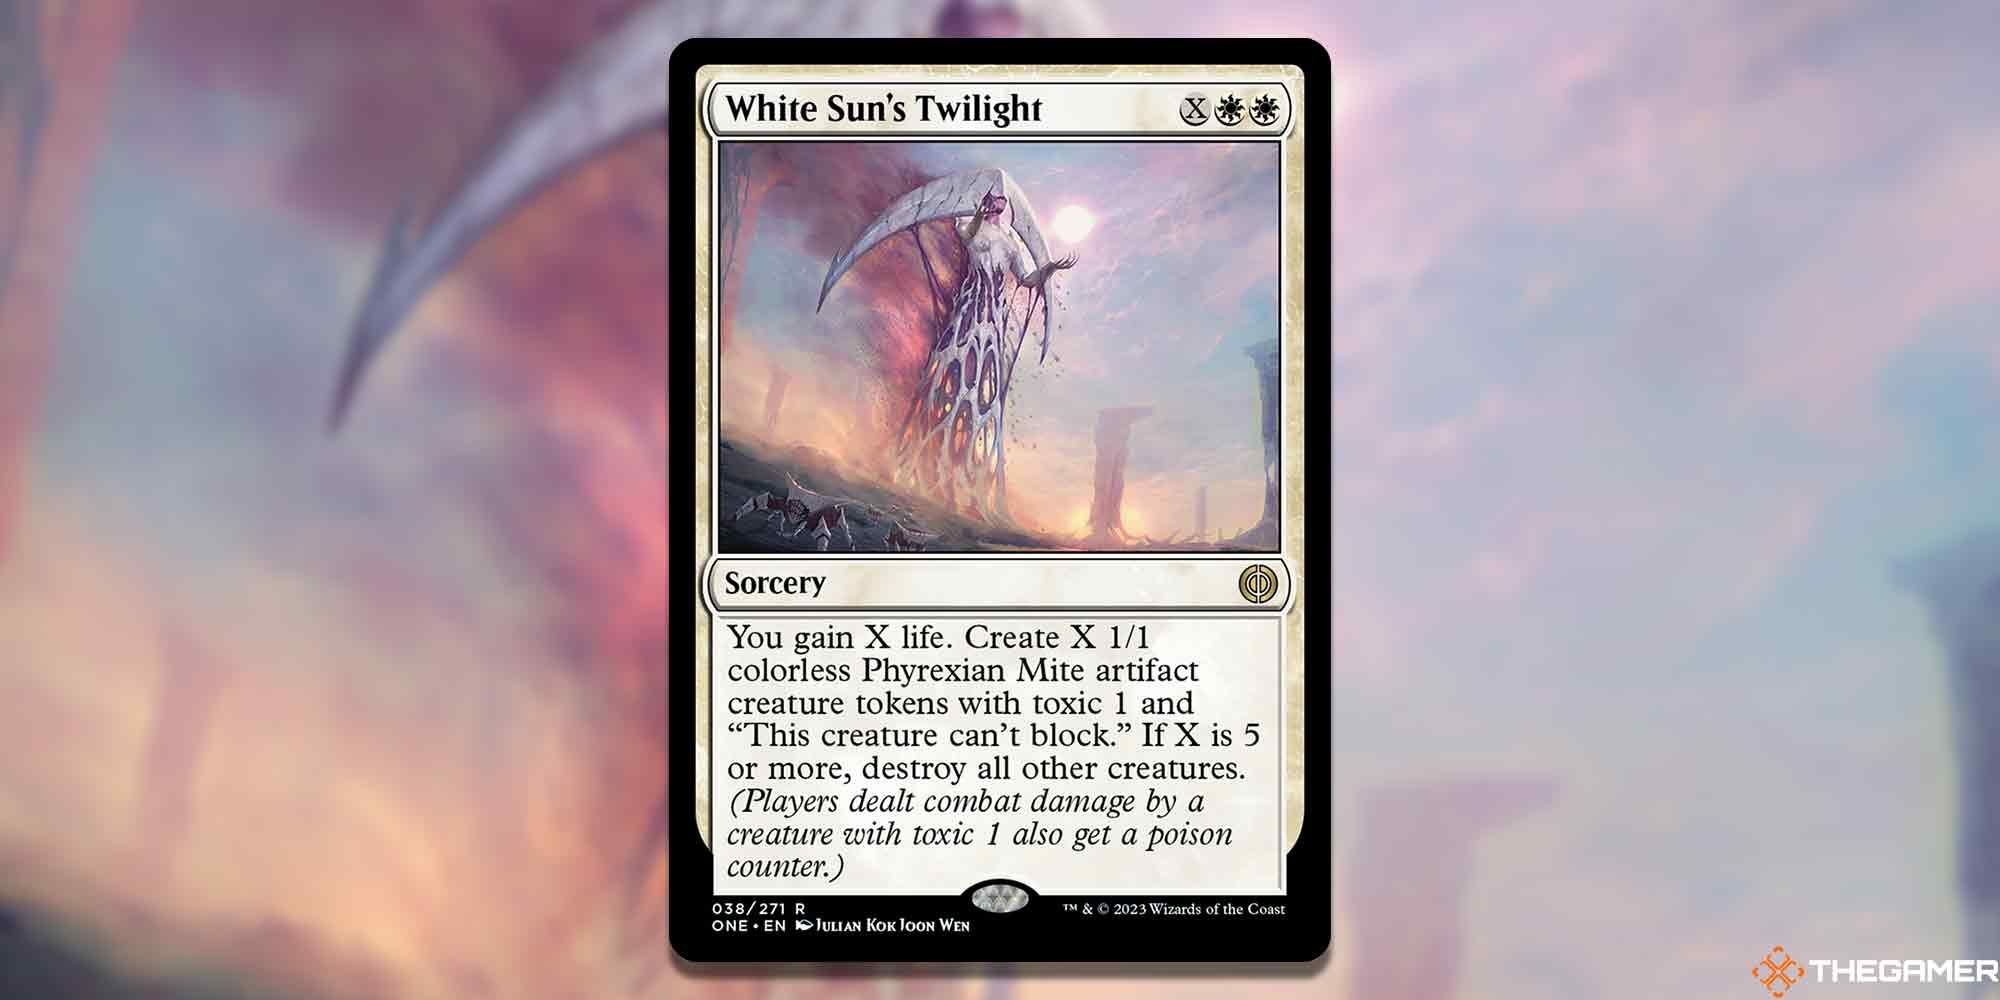 Image of the White Sun's Twilight card in Magic: The Gathering, with art by Julian Kok Joon Wen